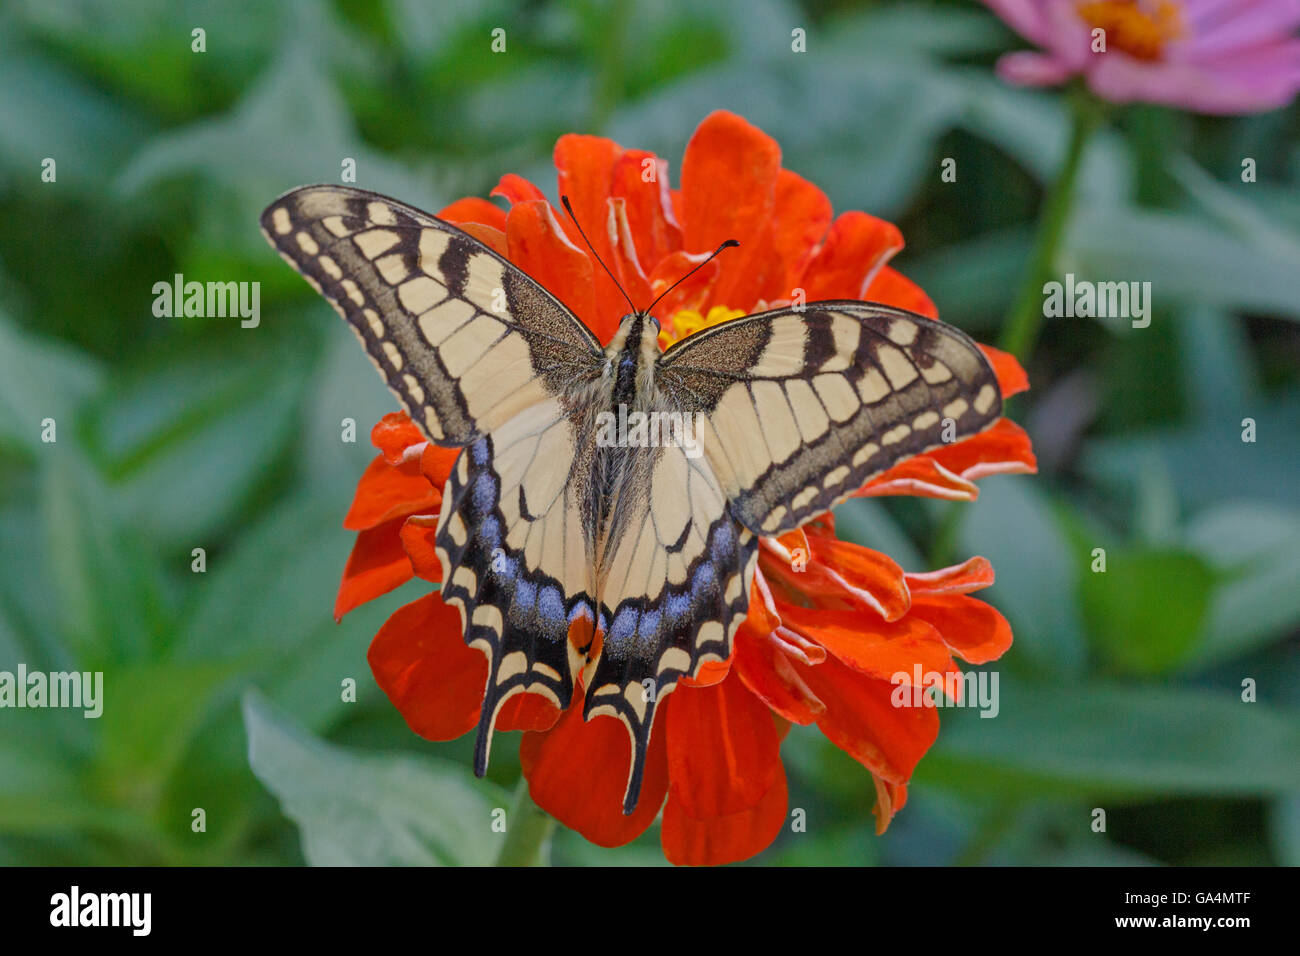 Papilio Machaon butterfly on red zinnia flower Stock Photo